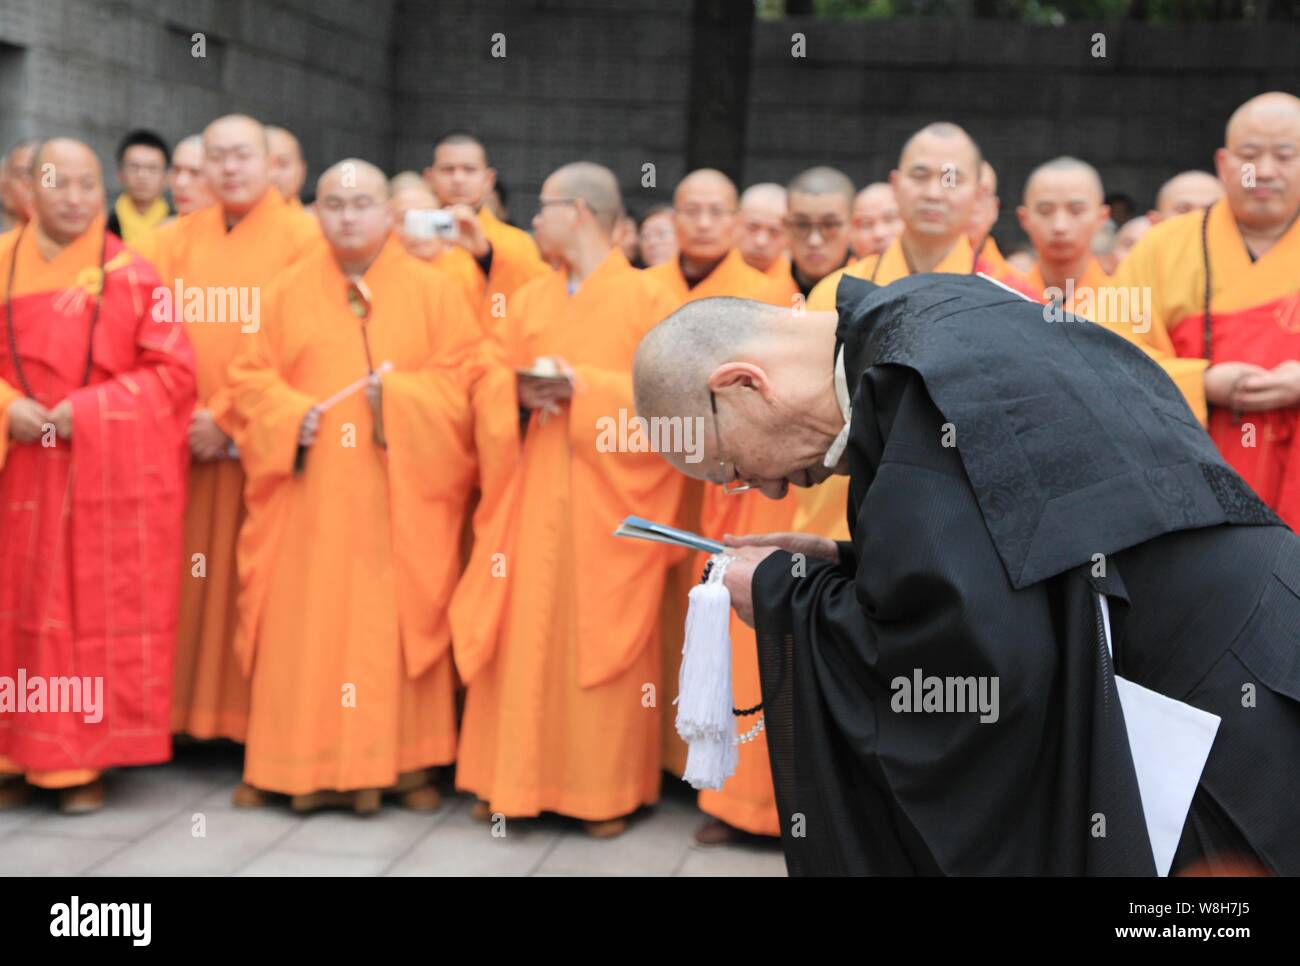 Japanese monk Yoshio Hasegawa, front, bows after chanting scriptures during a memorial to mourn for the victims of the Nanjing Massacre at the Museum Stock Photo